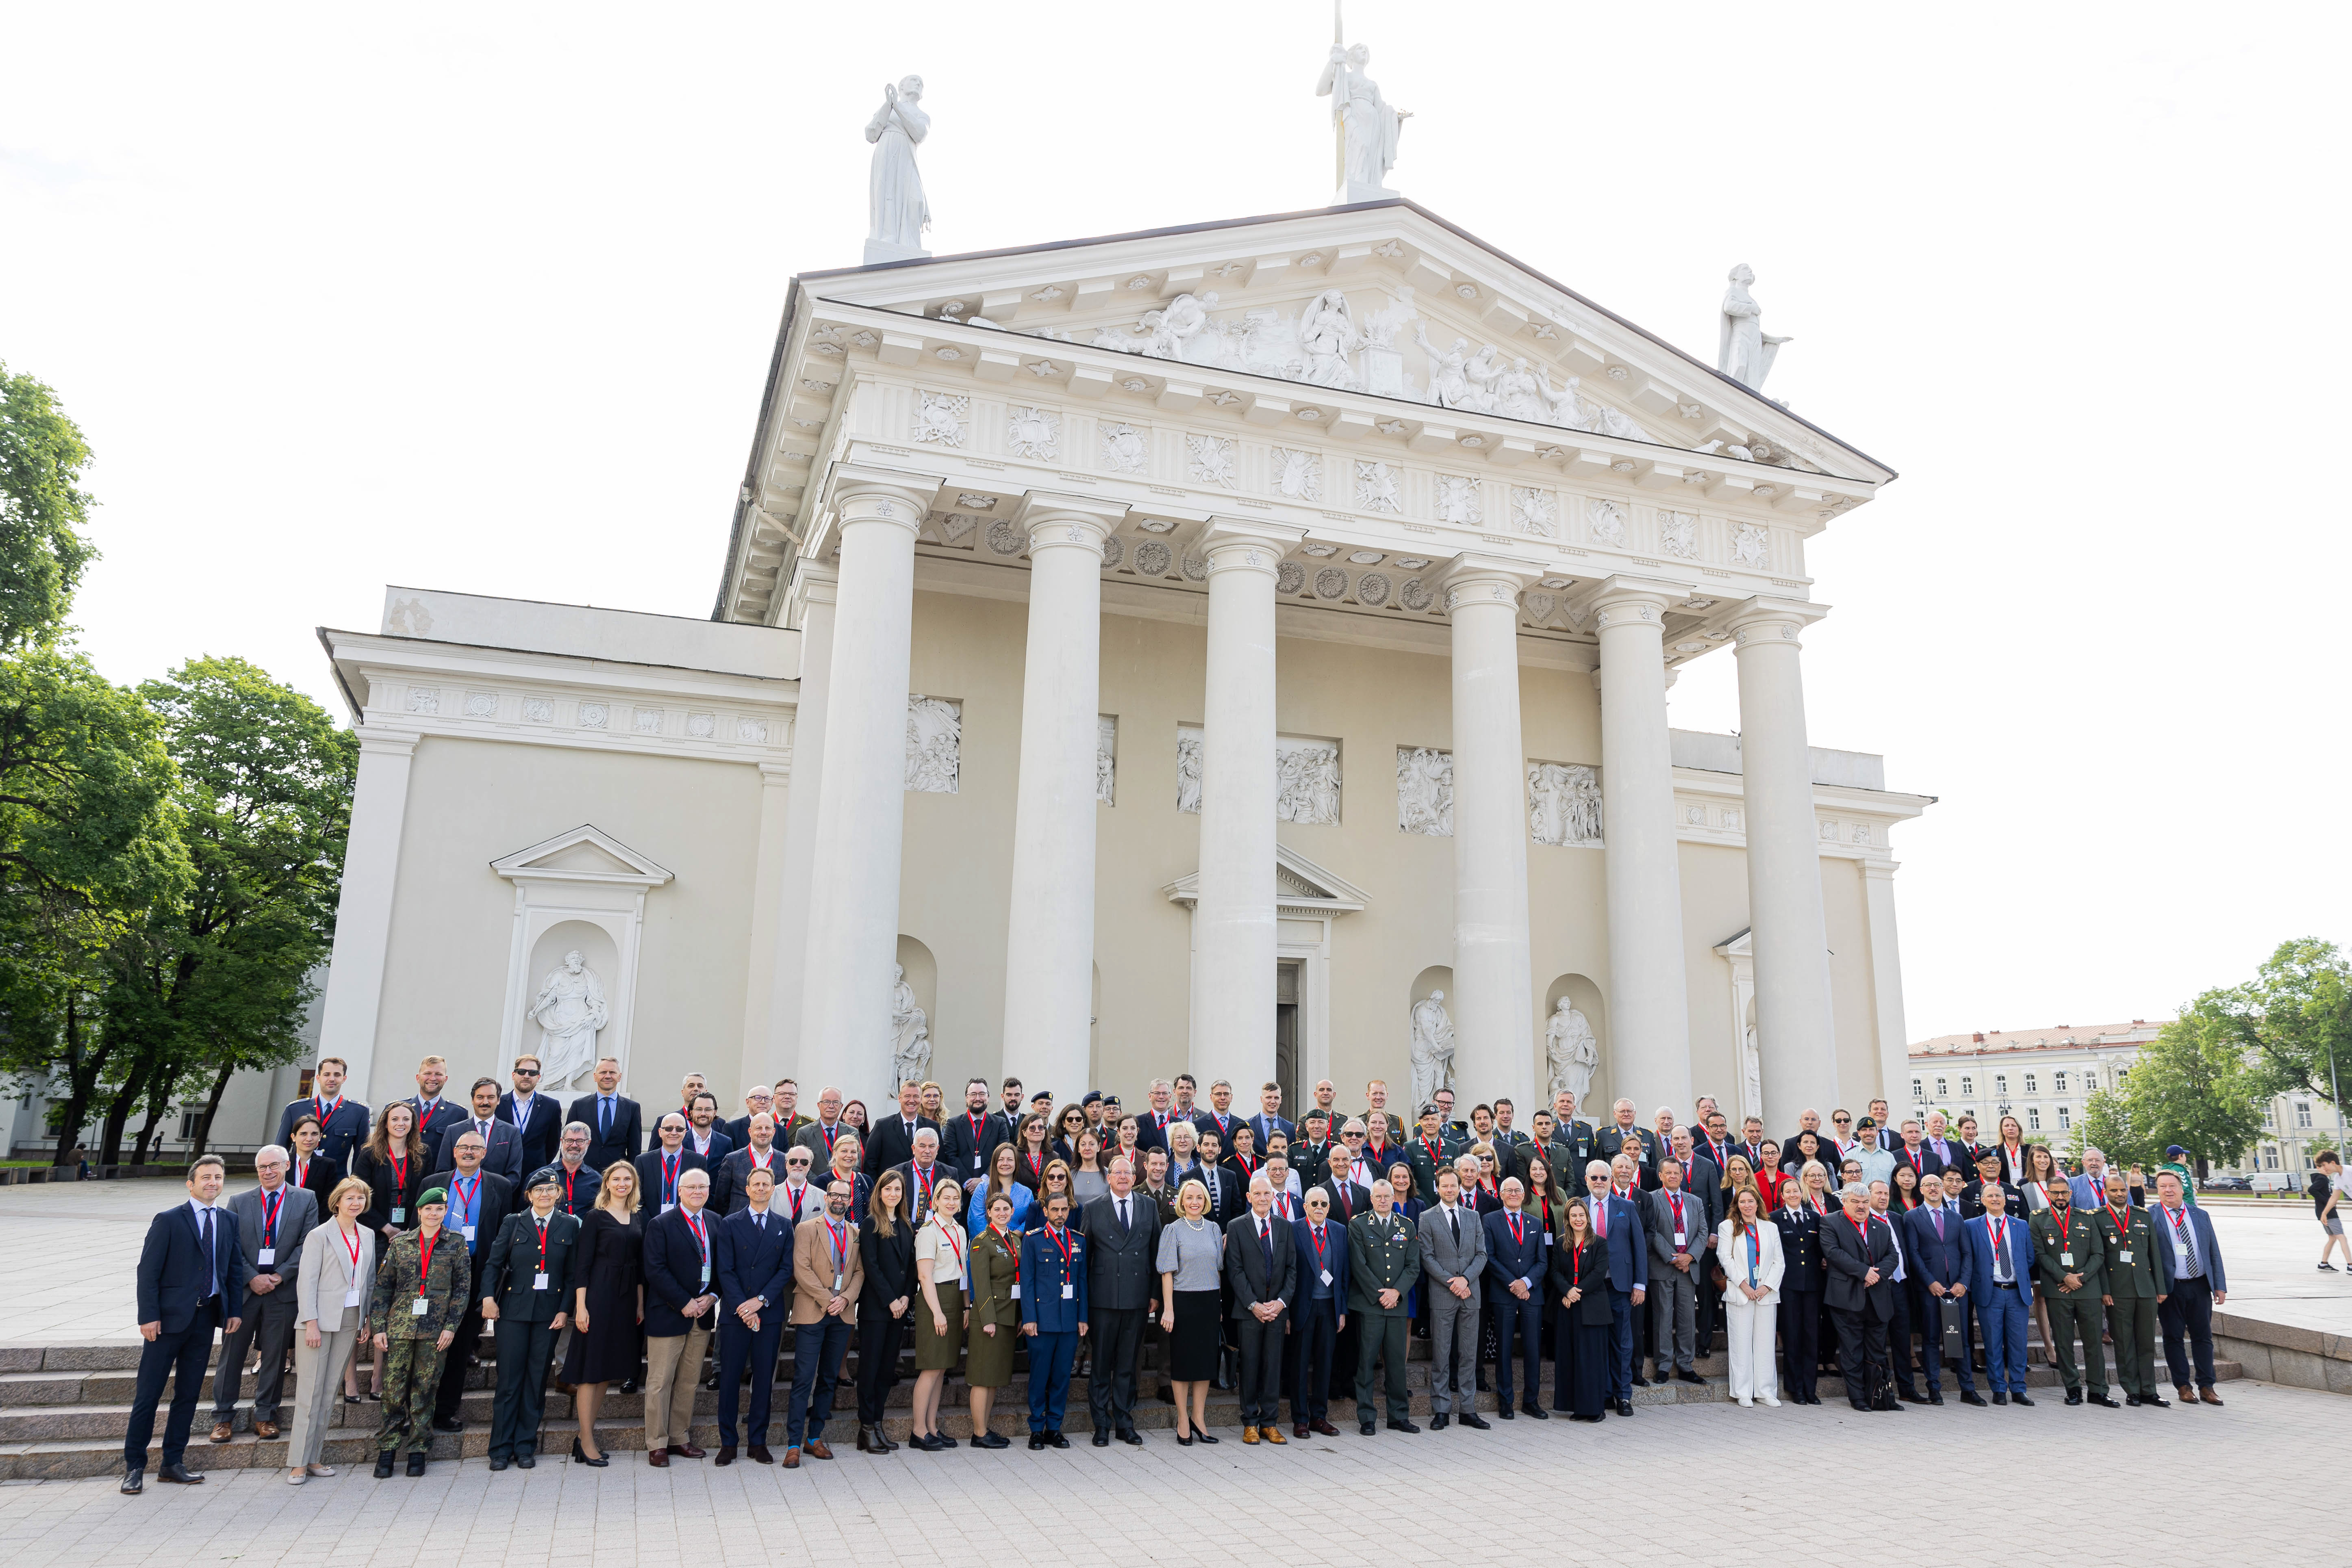 Participants of the 23rd Congress of the International Society for Military Law and the Law of War posing in front of the building